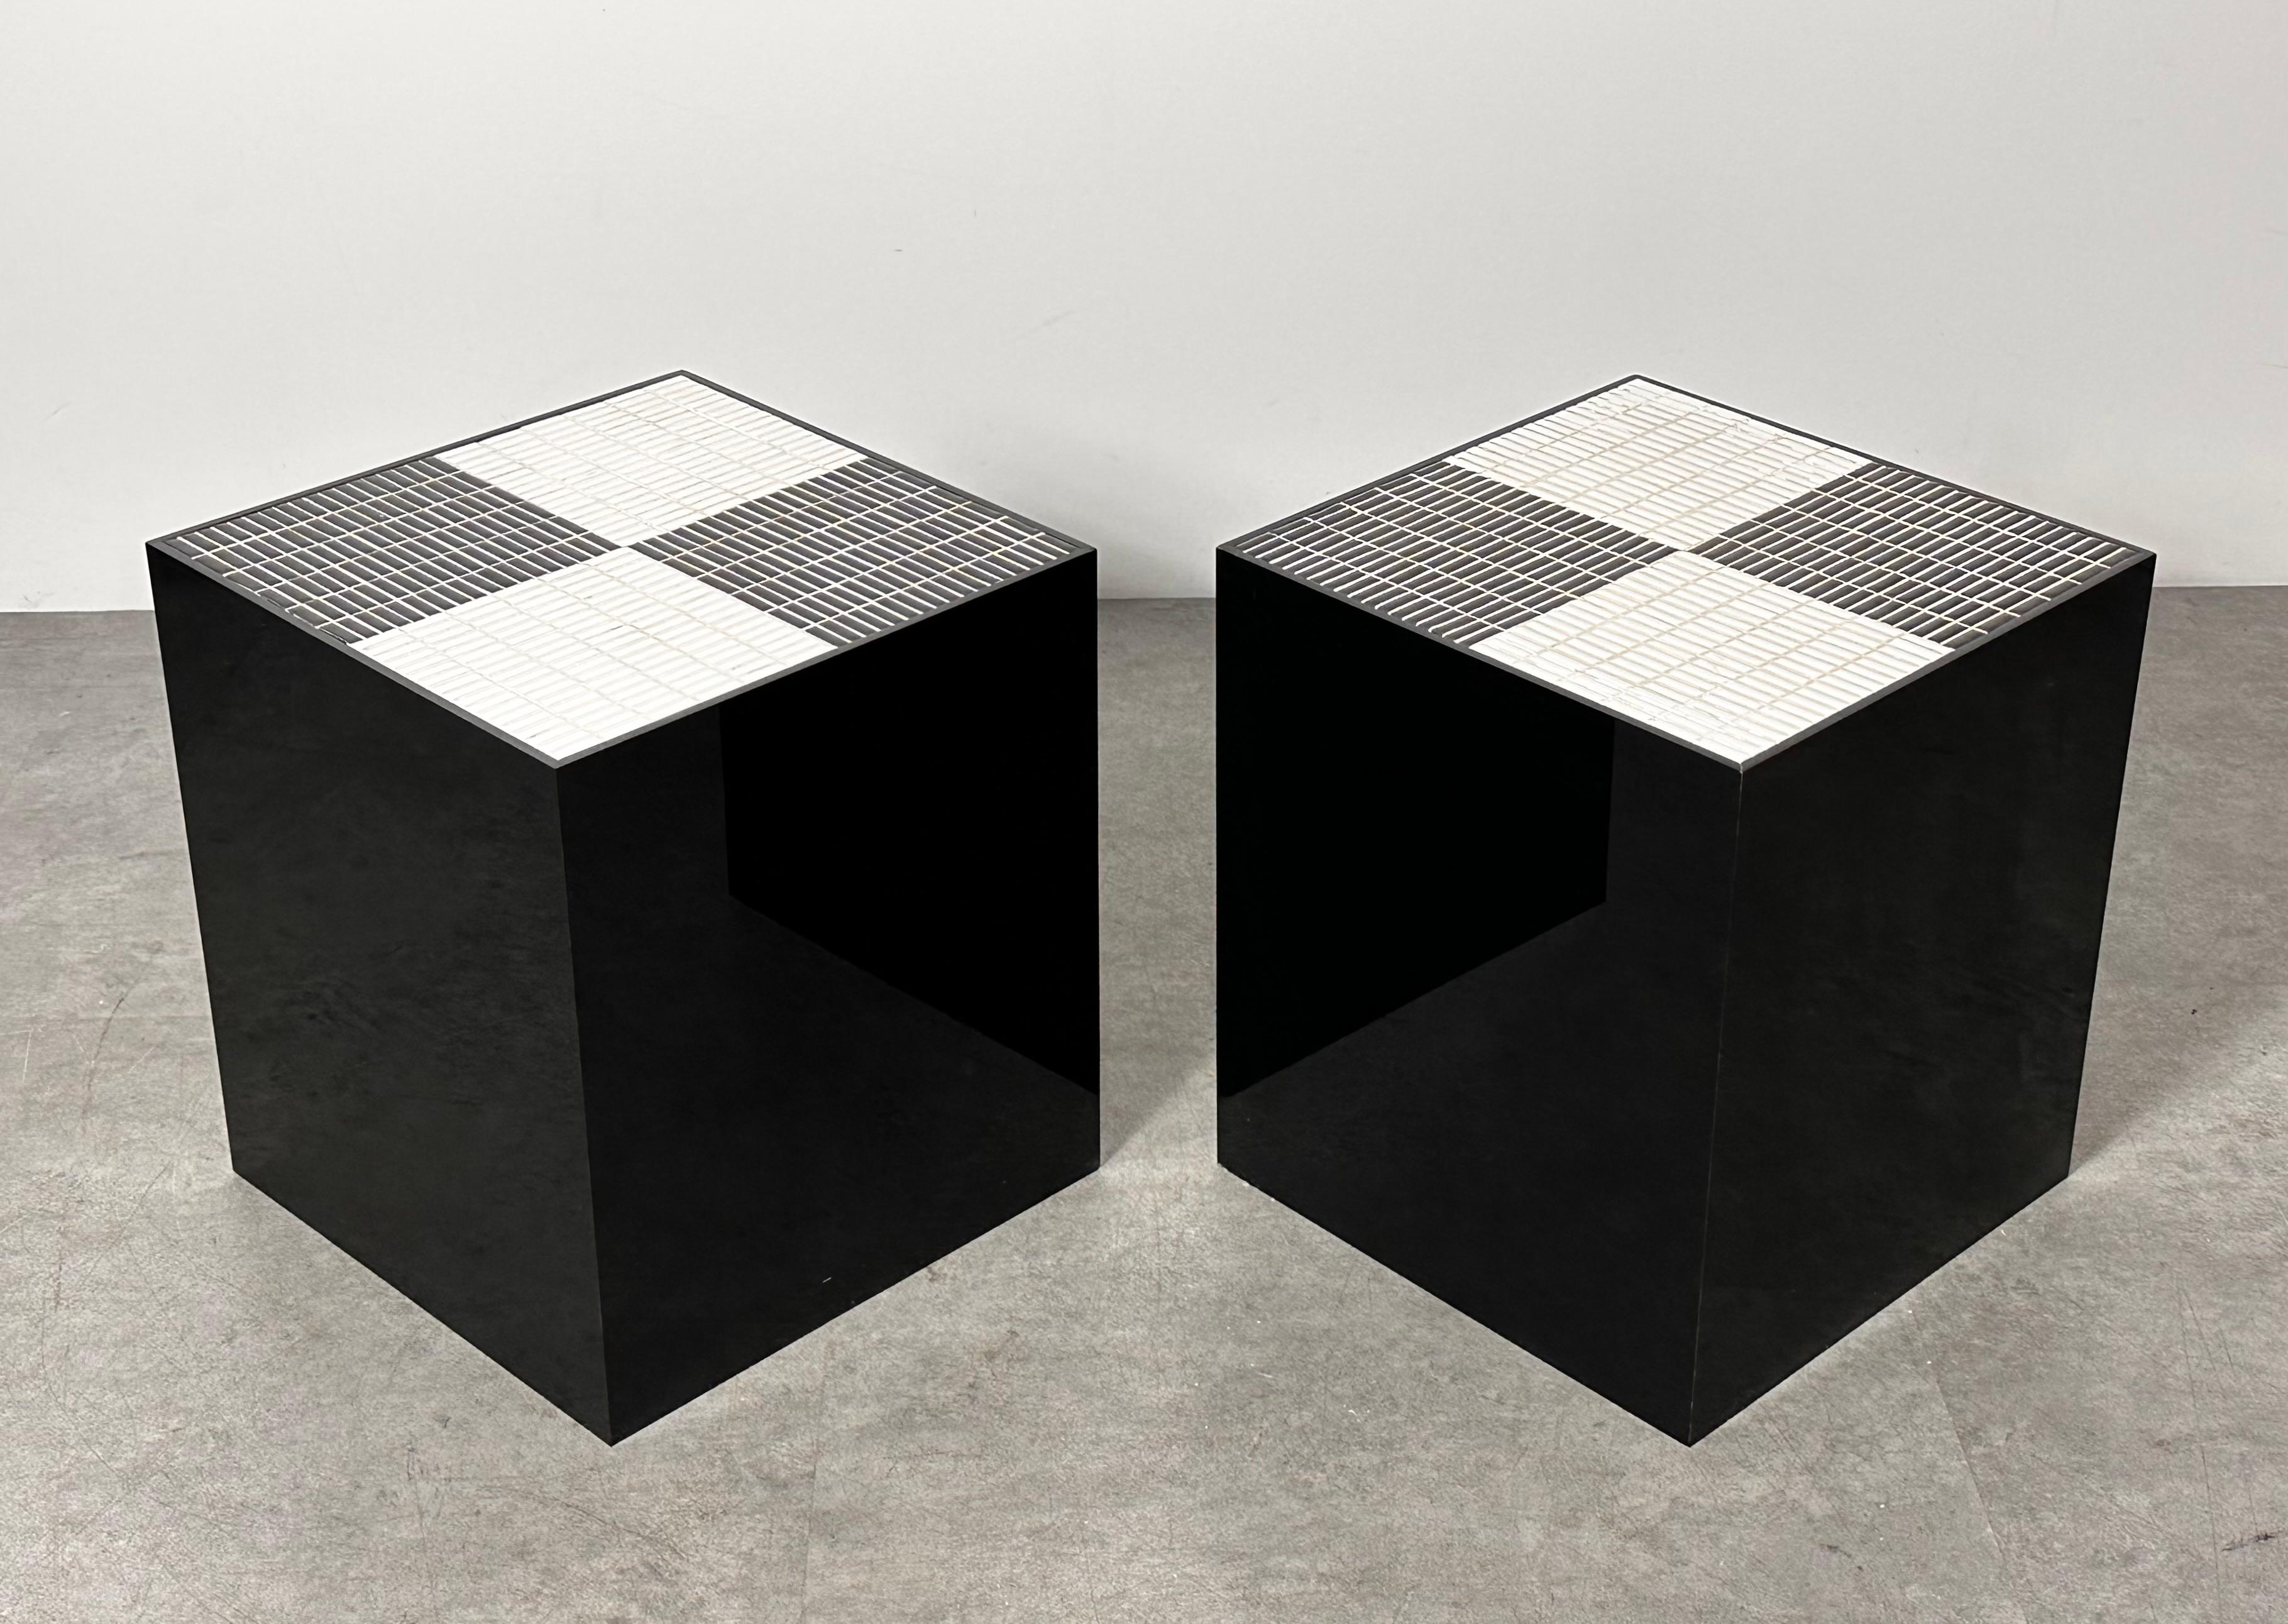 One of a kind of artist made mosaic tile top cube pedestal tables circa 1970s

Black acrylic squared bases with inset black and white checker pattern tile surfaces
Made by and from the estate of Detroit artist Deanna Bardy

Both sculptural and